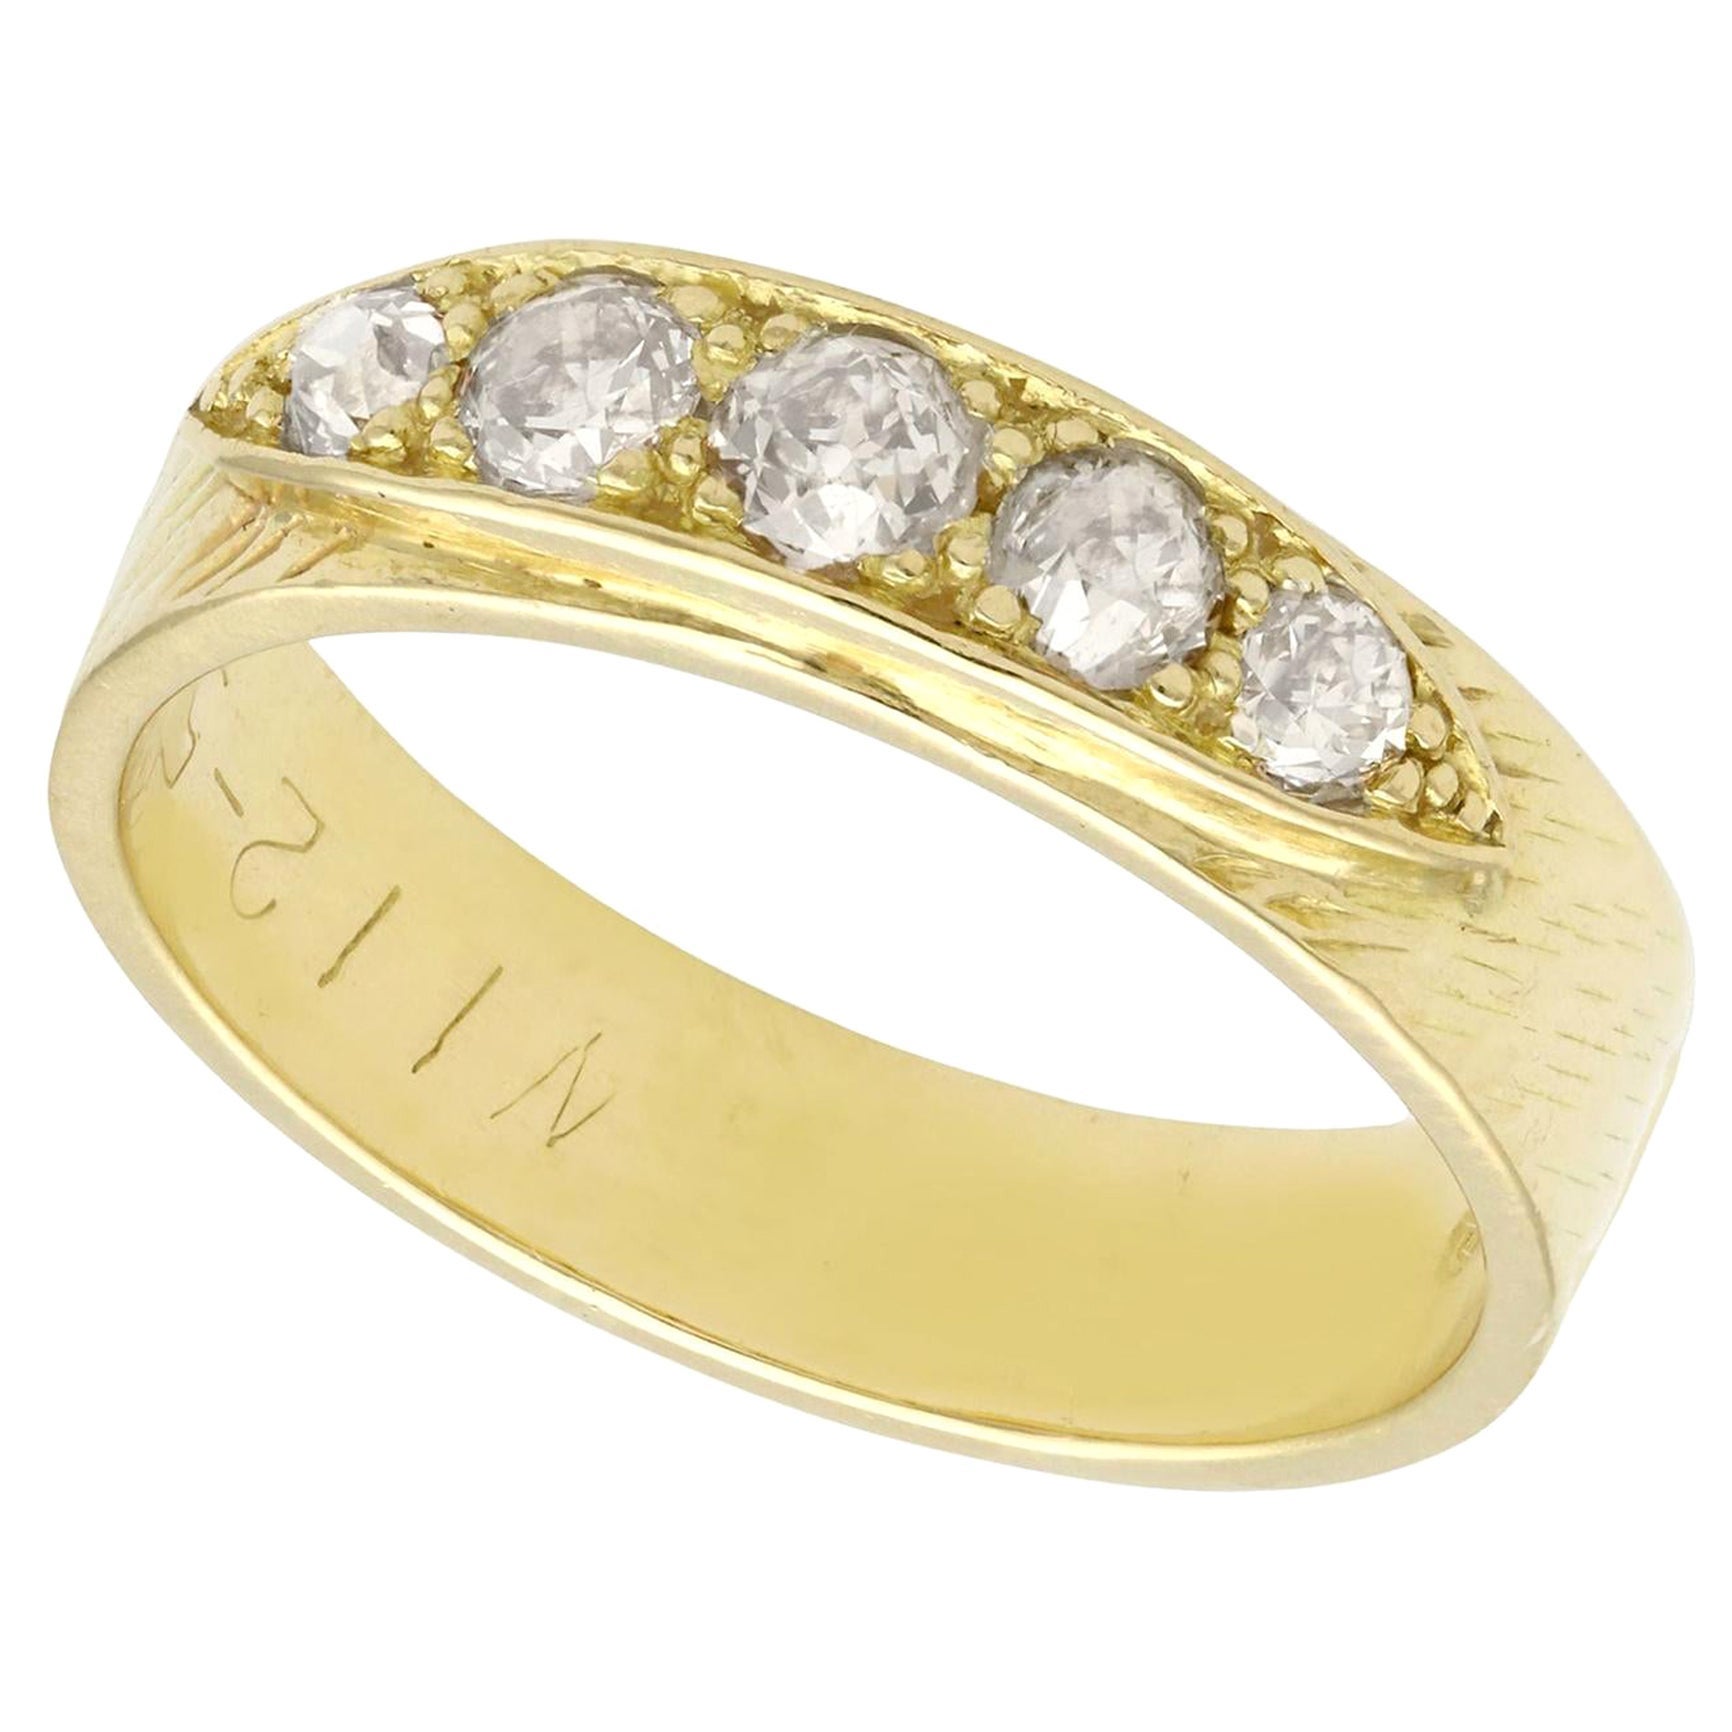 Antique and Vintage Diamond 18K Yellow Gold Cocktail Ring